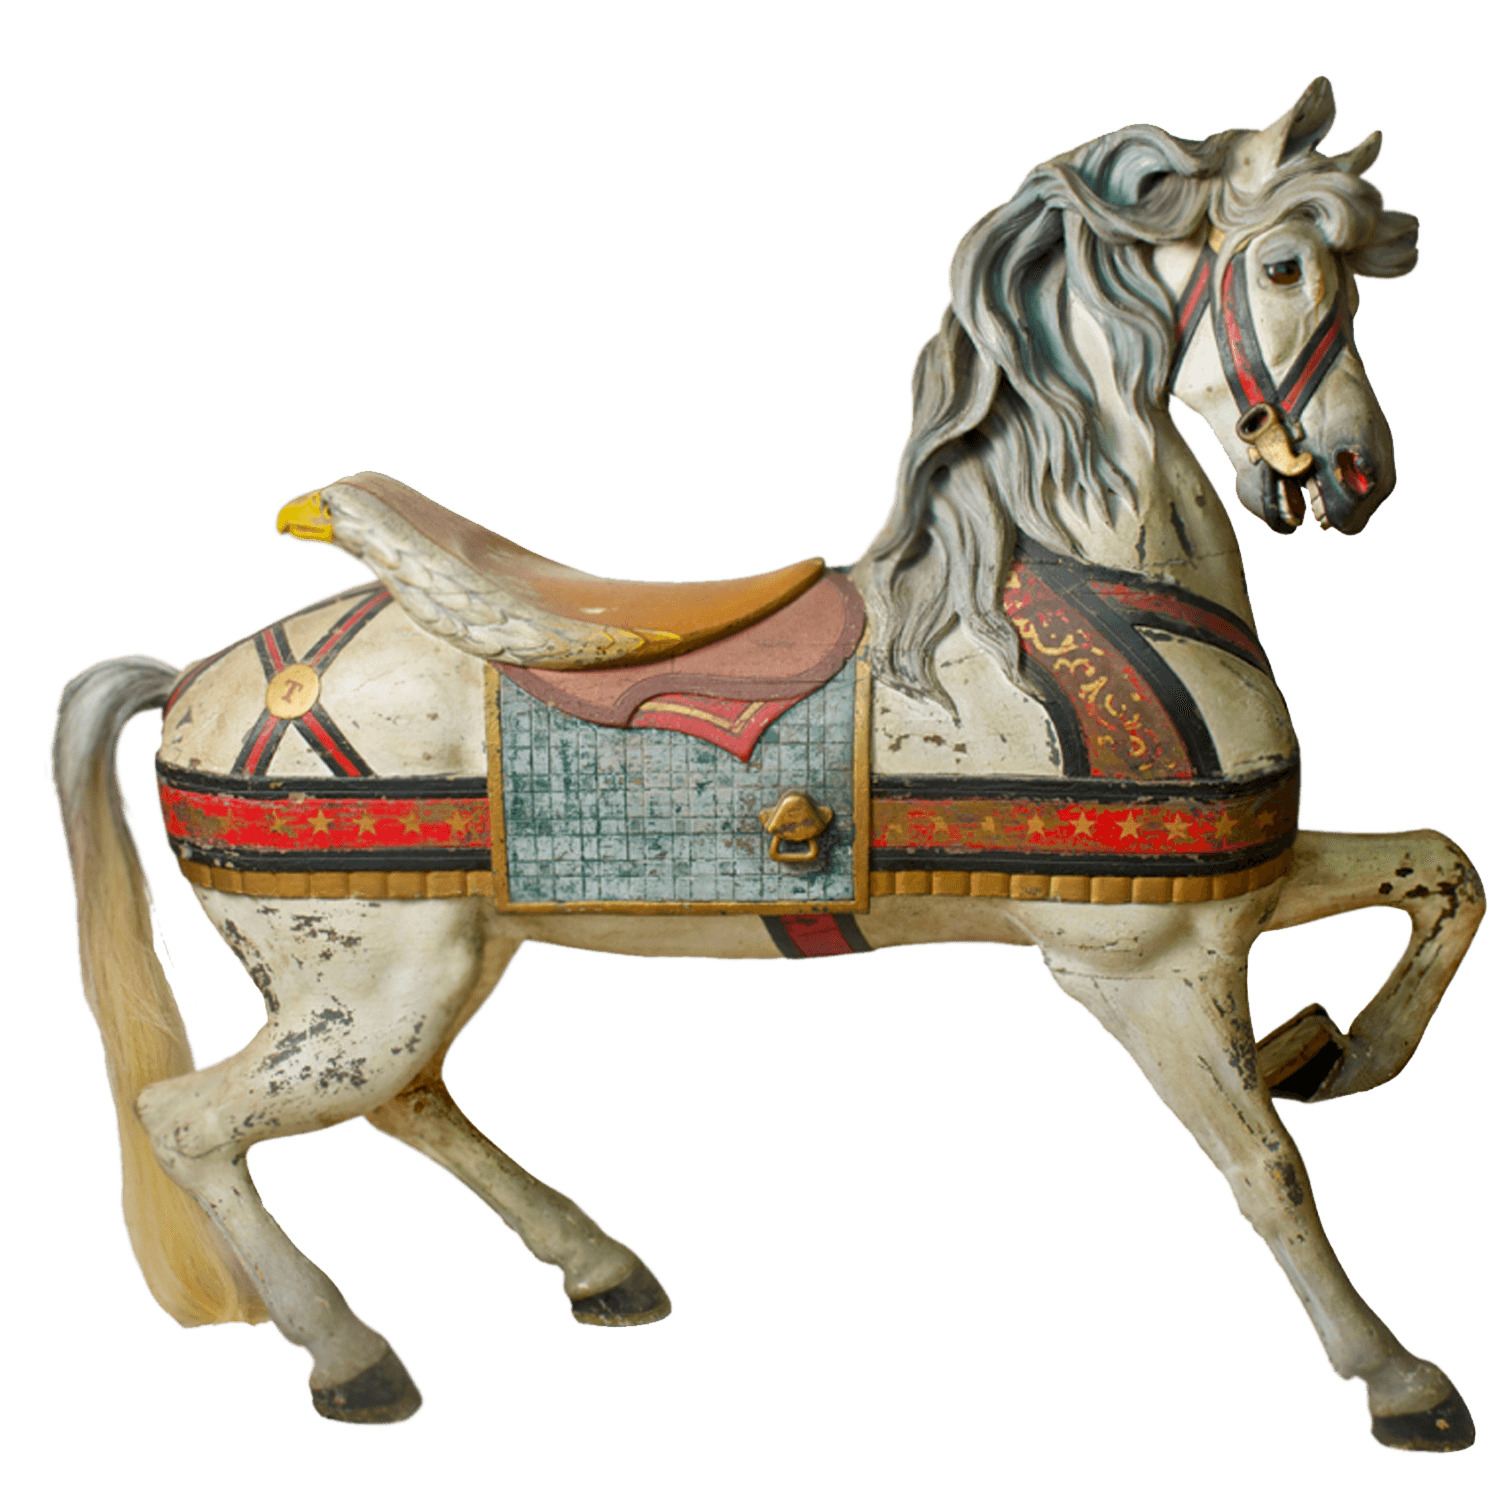 Antique Carousel Horse icons